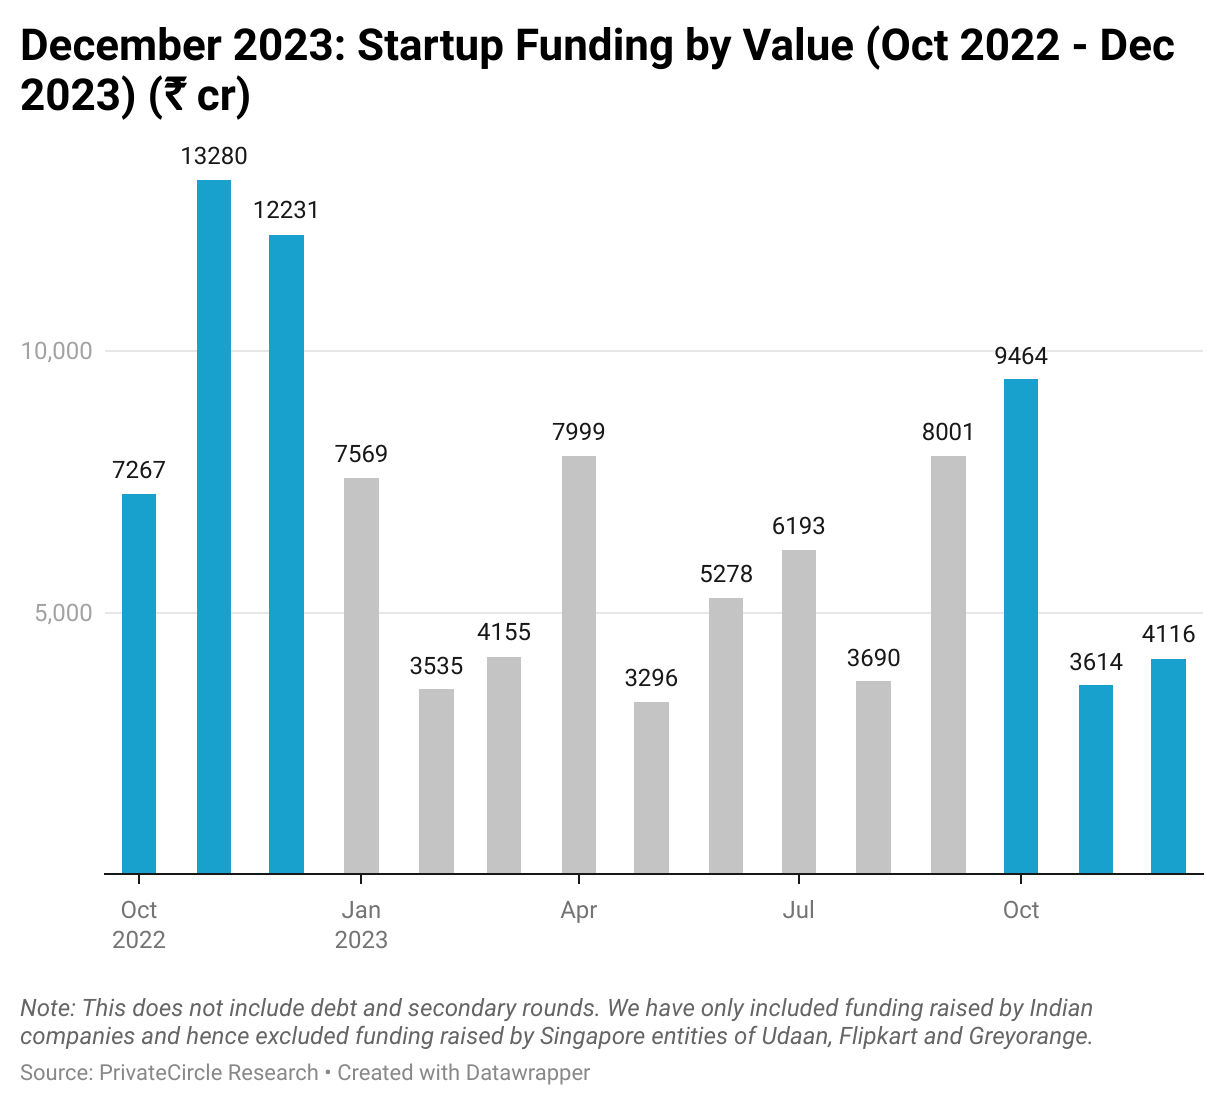 December 2023: Startup Funding by Value (Dec 2022 - Dec 2023) (₹ cr).

Funding amount raised in December 2023 jumped to ₹4,116 cr as compared to ₹3,614 cr in Nov 2023 and ₹12,231 cr in Dec 2022.
